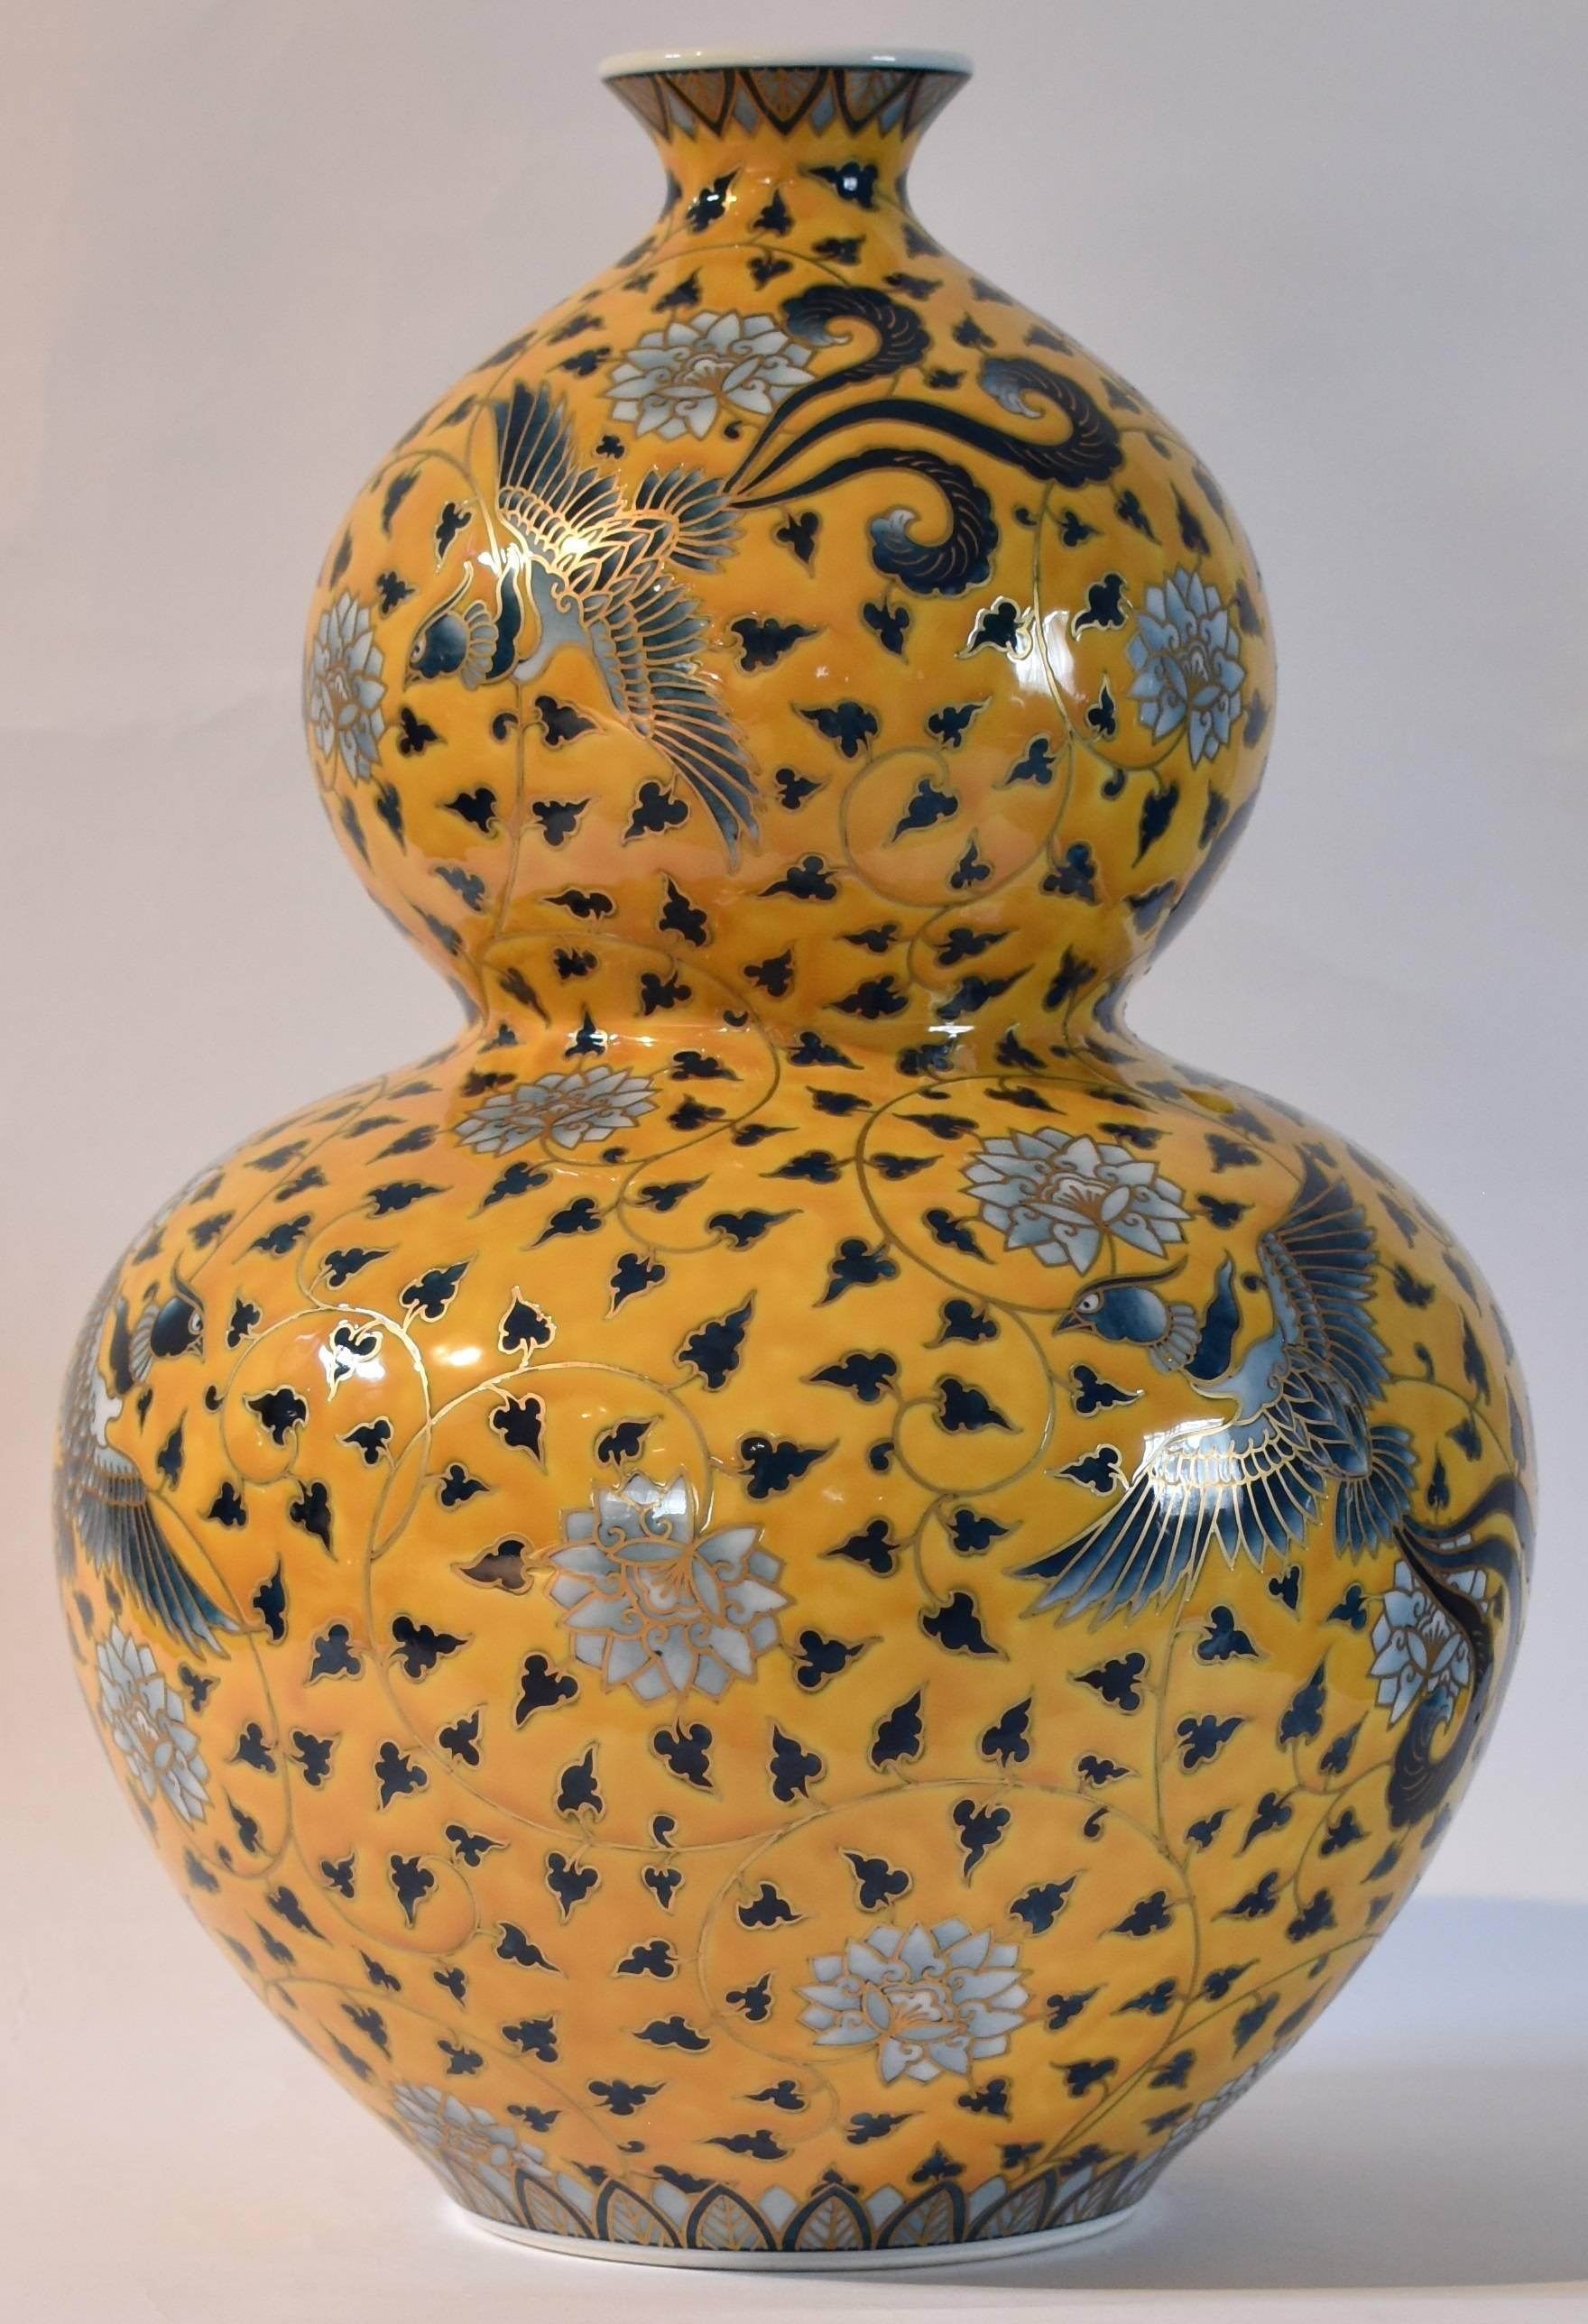 Exceptional large yellow gilded hand painted contemporary Japanese Cerami vase, presented in an auspicious double-gourd form combining an arabesque motif with birds and flowers set against a brilliant yellow background, a masterpiece by highly